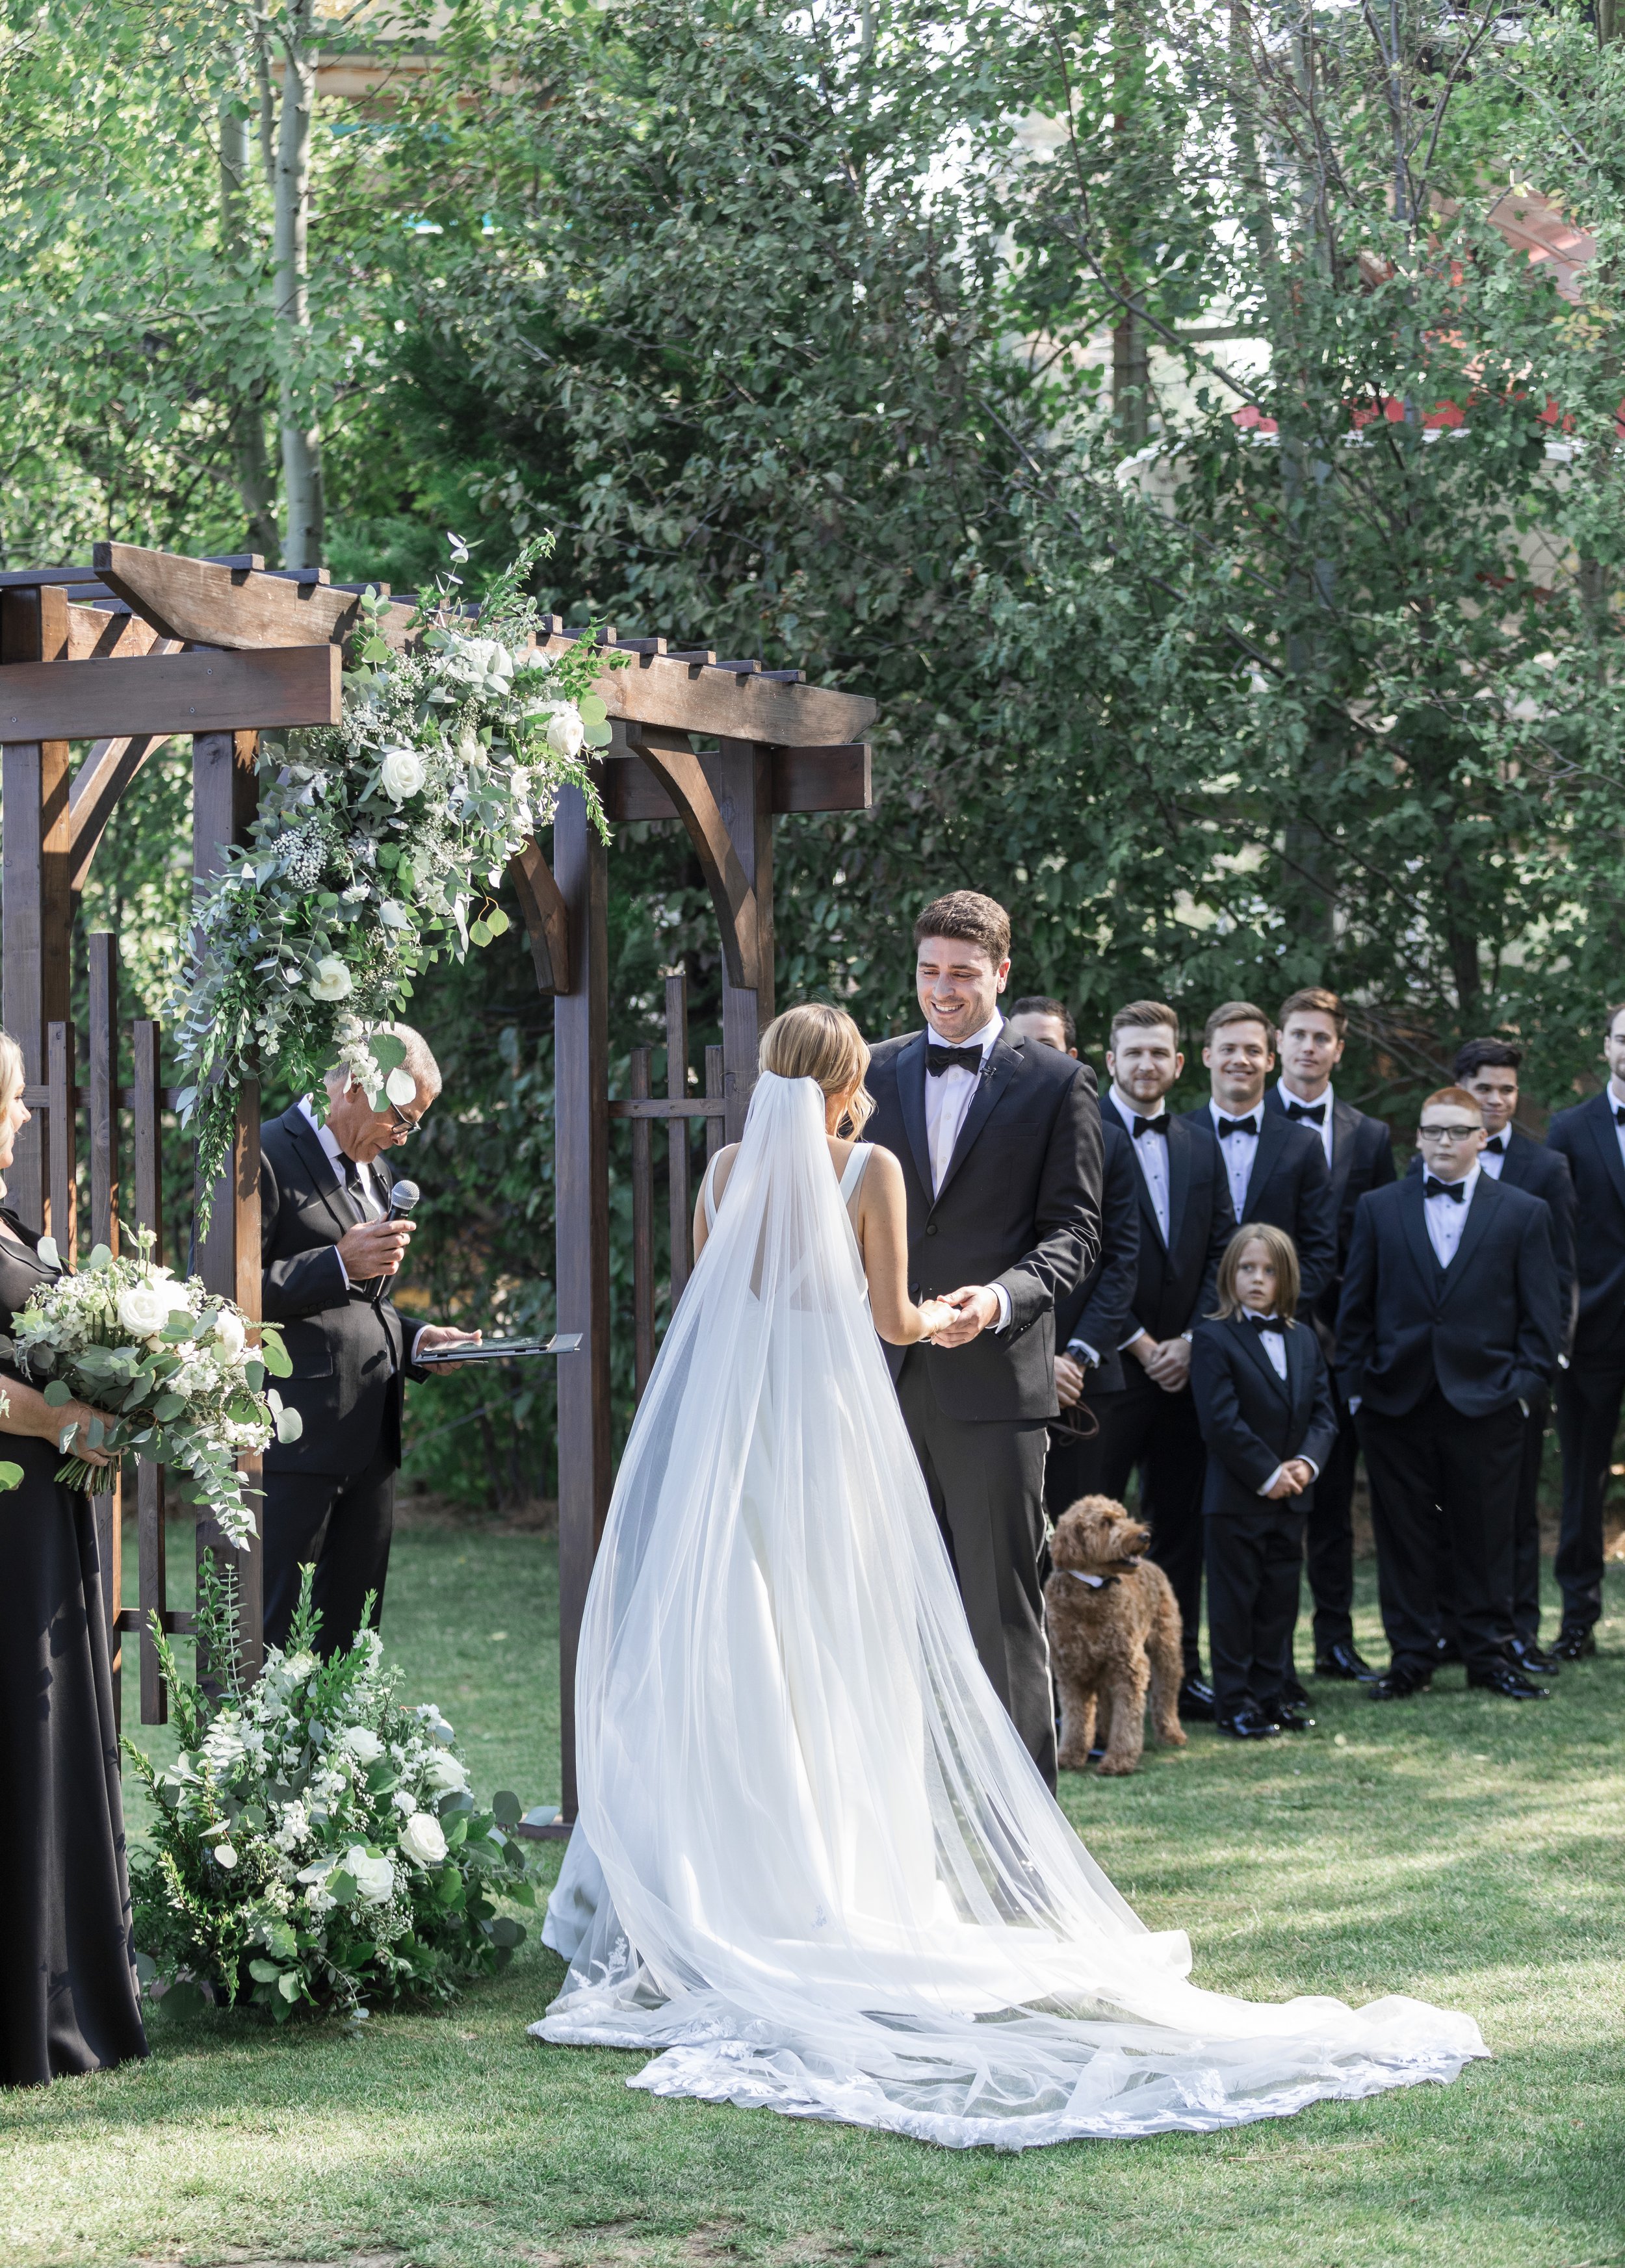  A bride and groom holding hands at a wooden altar during an outdoor wedding captured by Savanna Richardson Photography. outdoor altar summer wed #savannarichardsonphotography #tahoewedding #lakesidewedding #outdoorwedding #summerwedding #laketahoe 